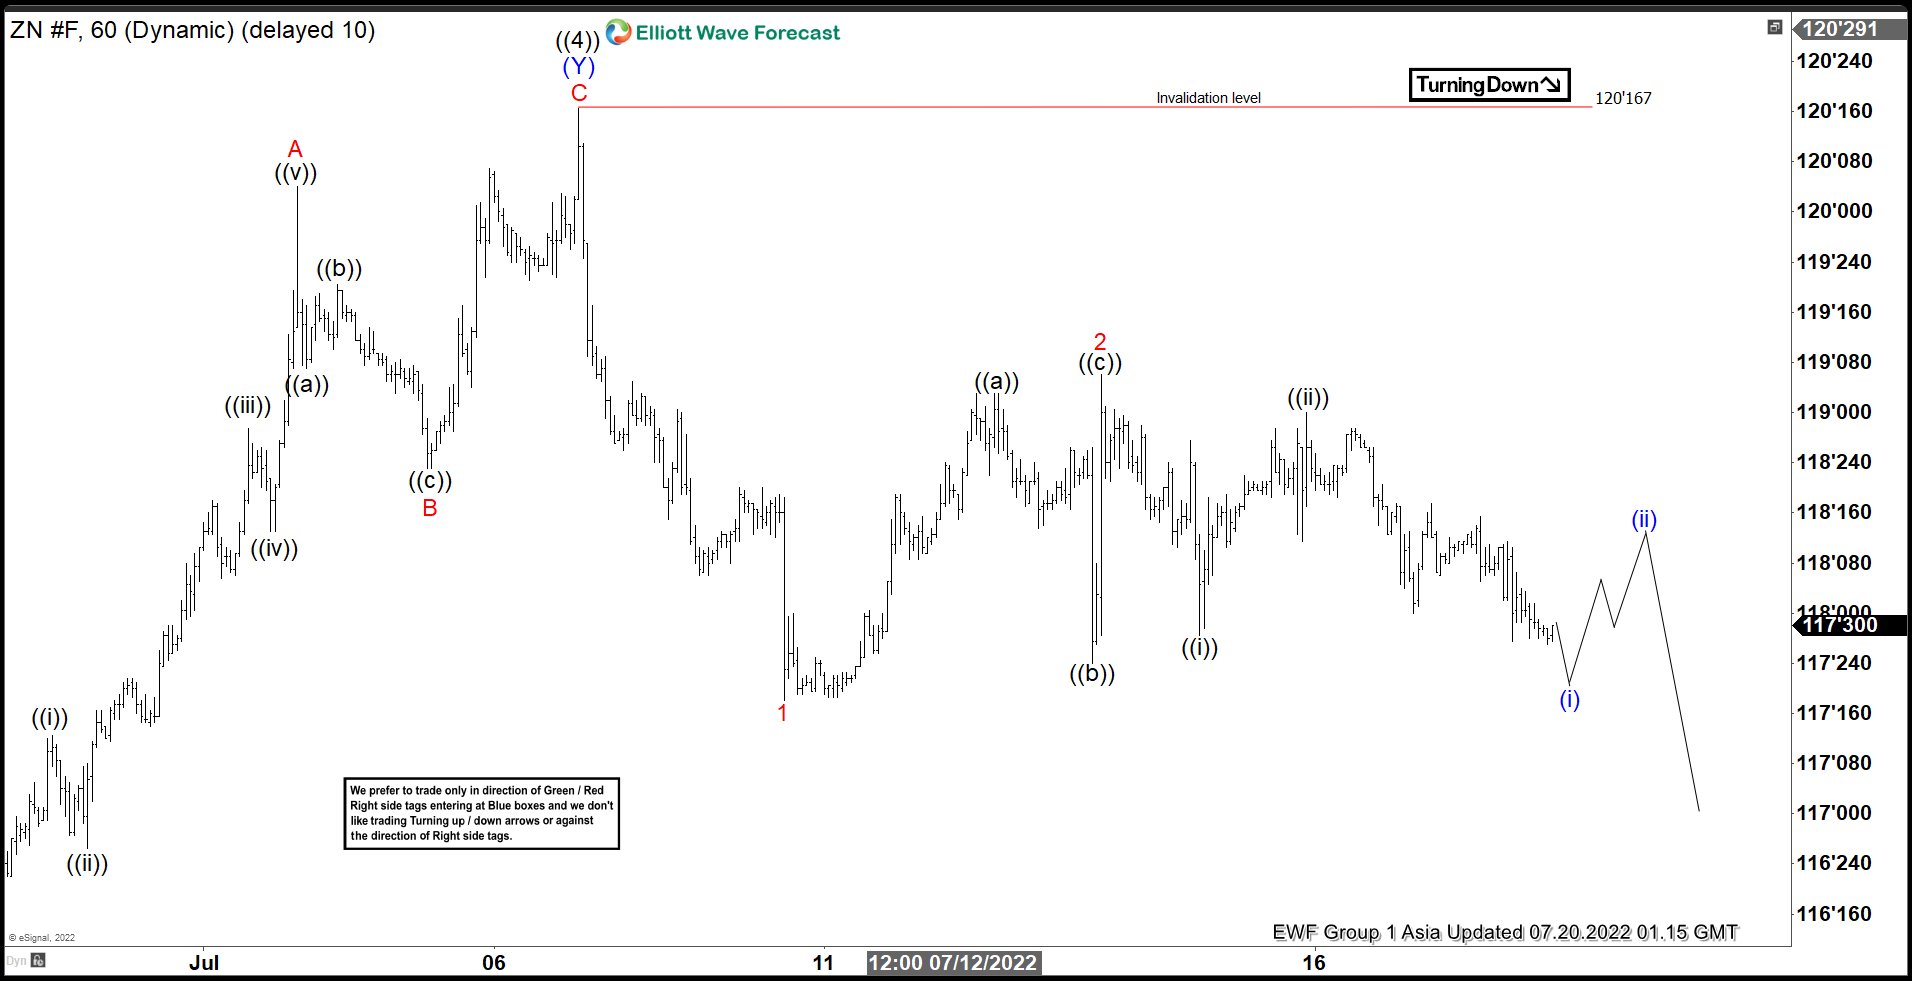 Elliott Wave View: Ten Year Notes (ZN) Looking to Extend Lower